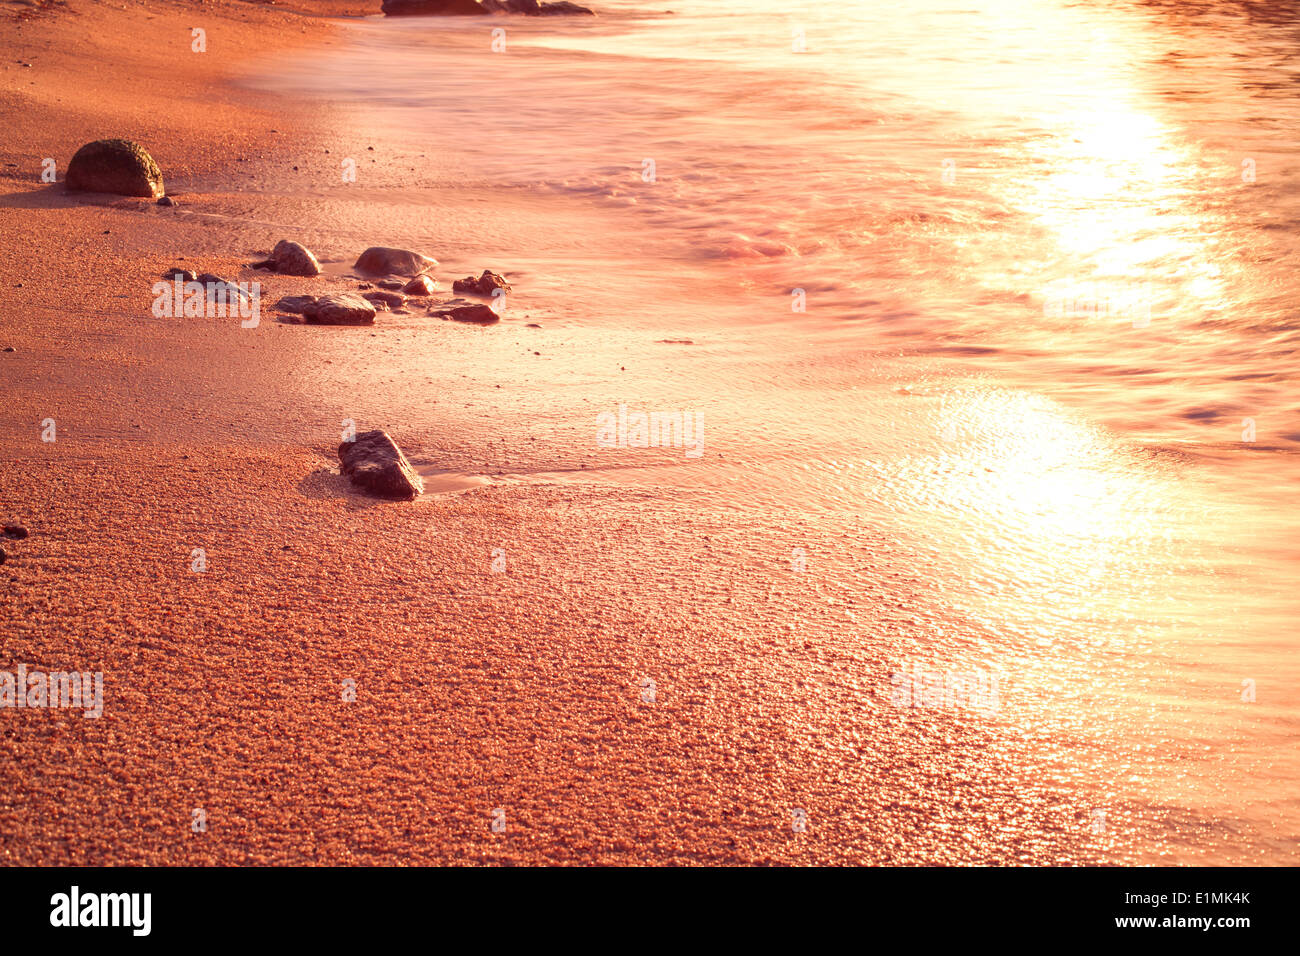 Sand and waves at sunrise. Stock Photo